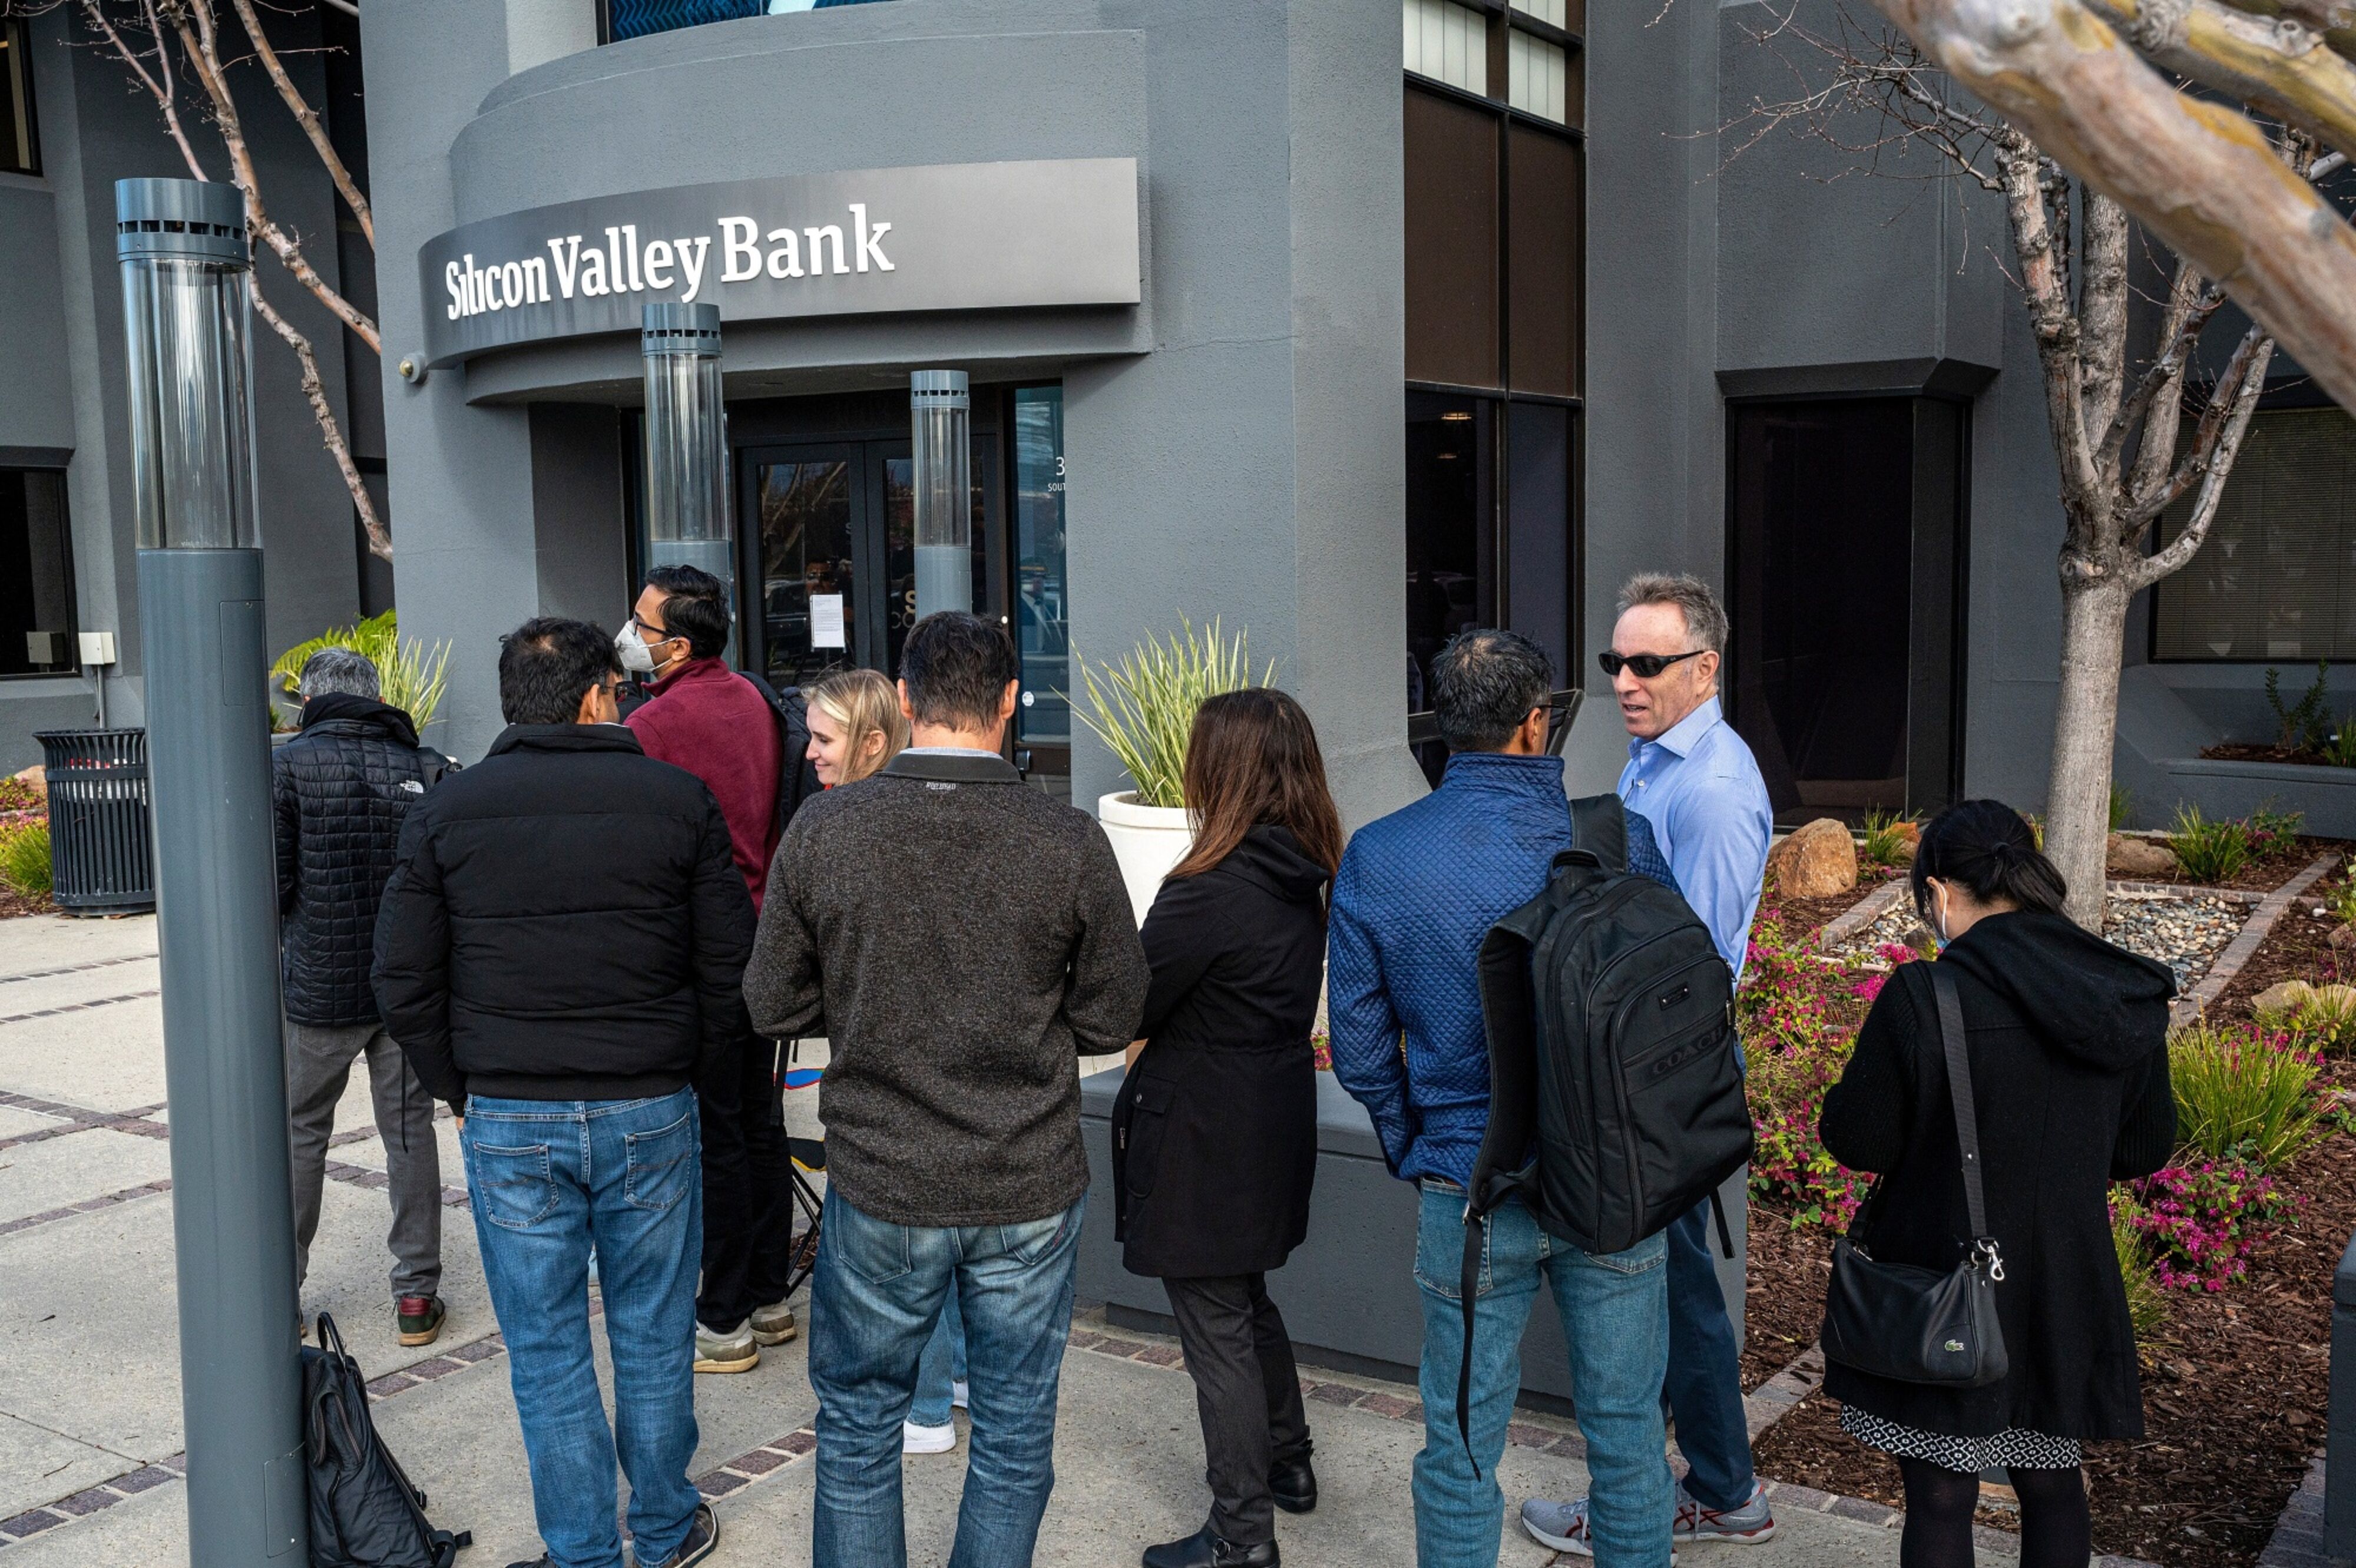 Customers outside Silicon Valley Bank headquarters in Santa Clara, California, on March 13.